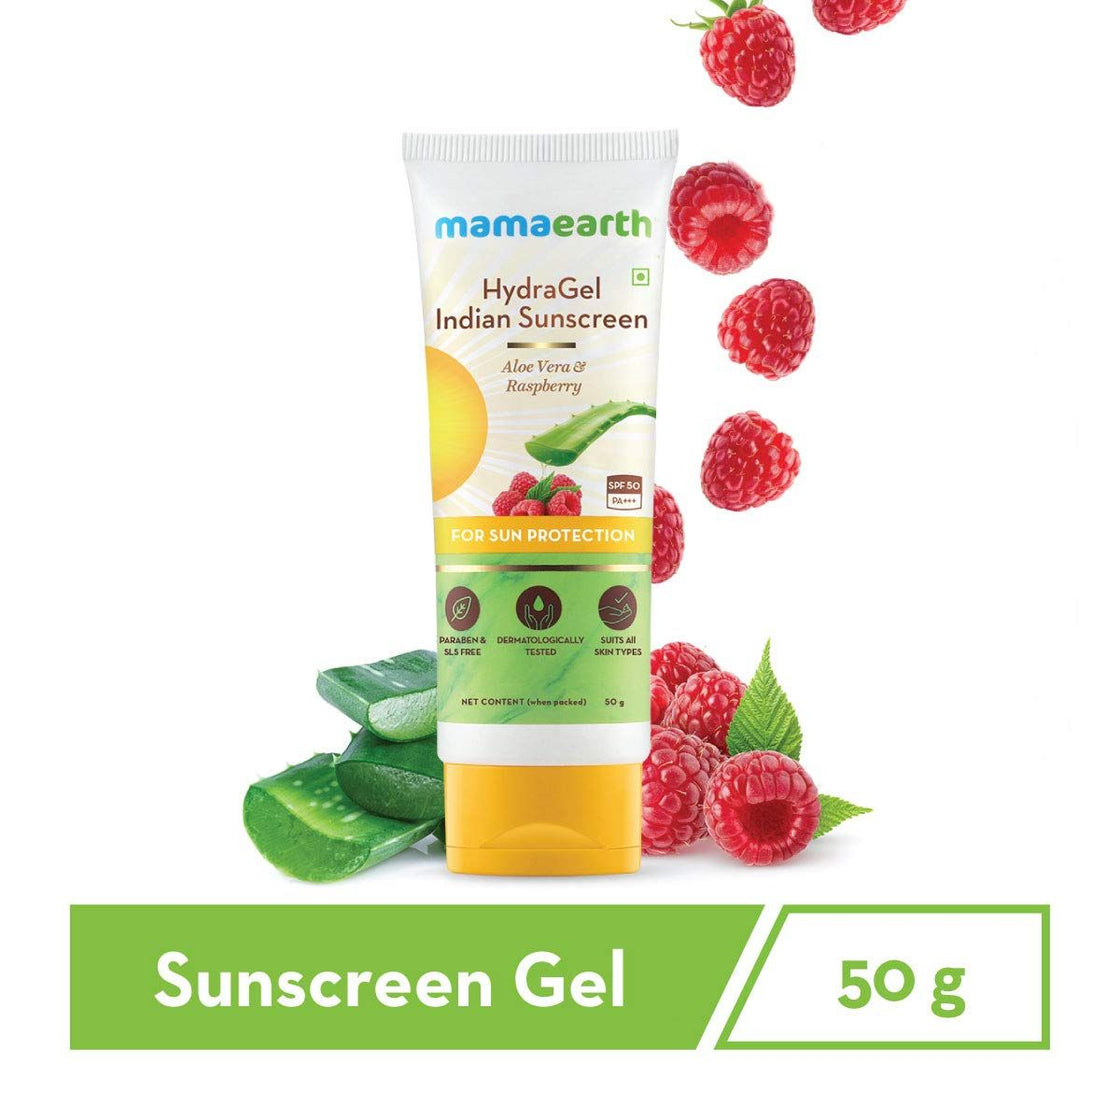 Mamaearth Hydragel Indian Sunscreen Spf 50, With Aloe Vera & Raspberry, For Sun Protection-2